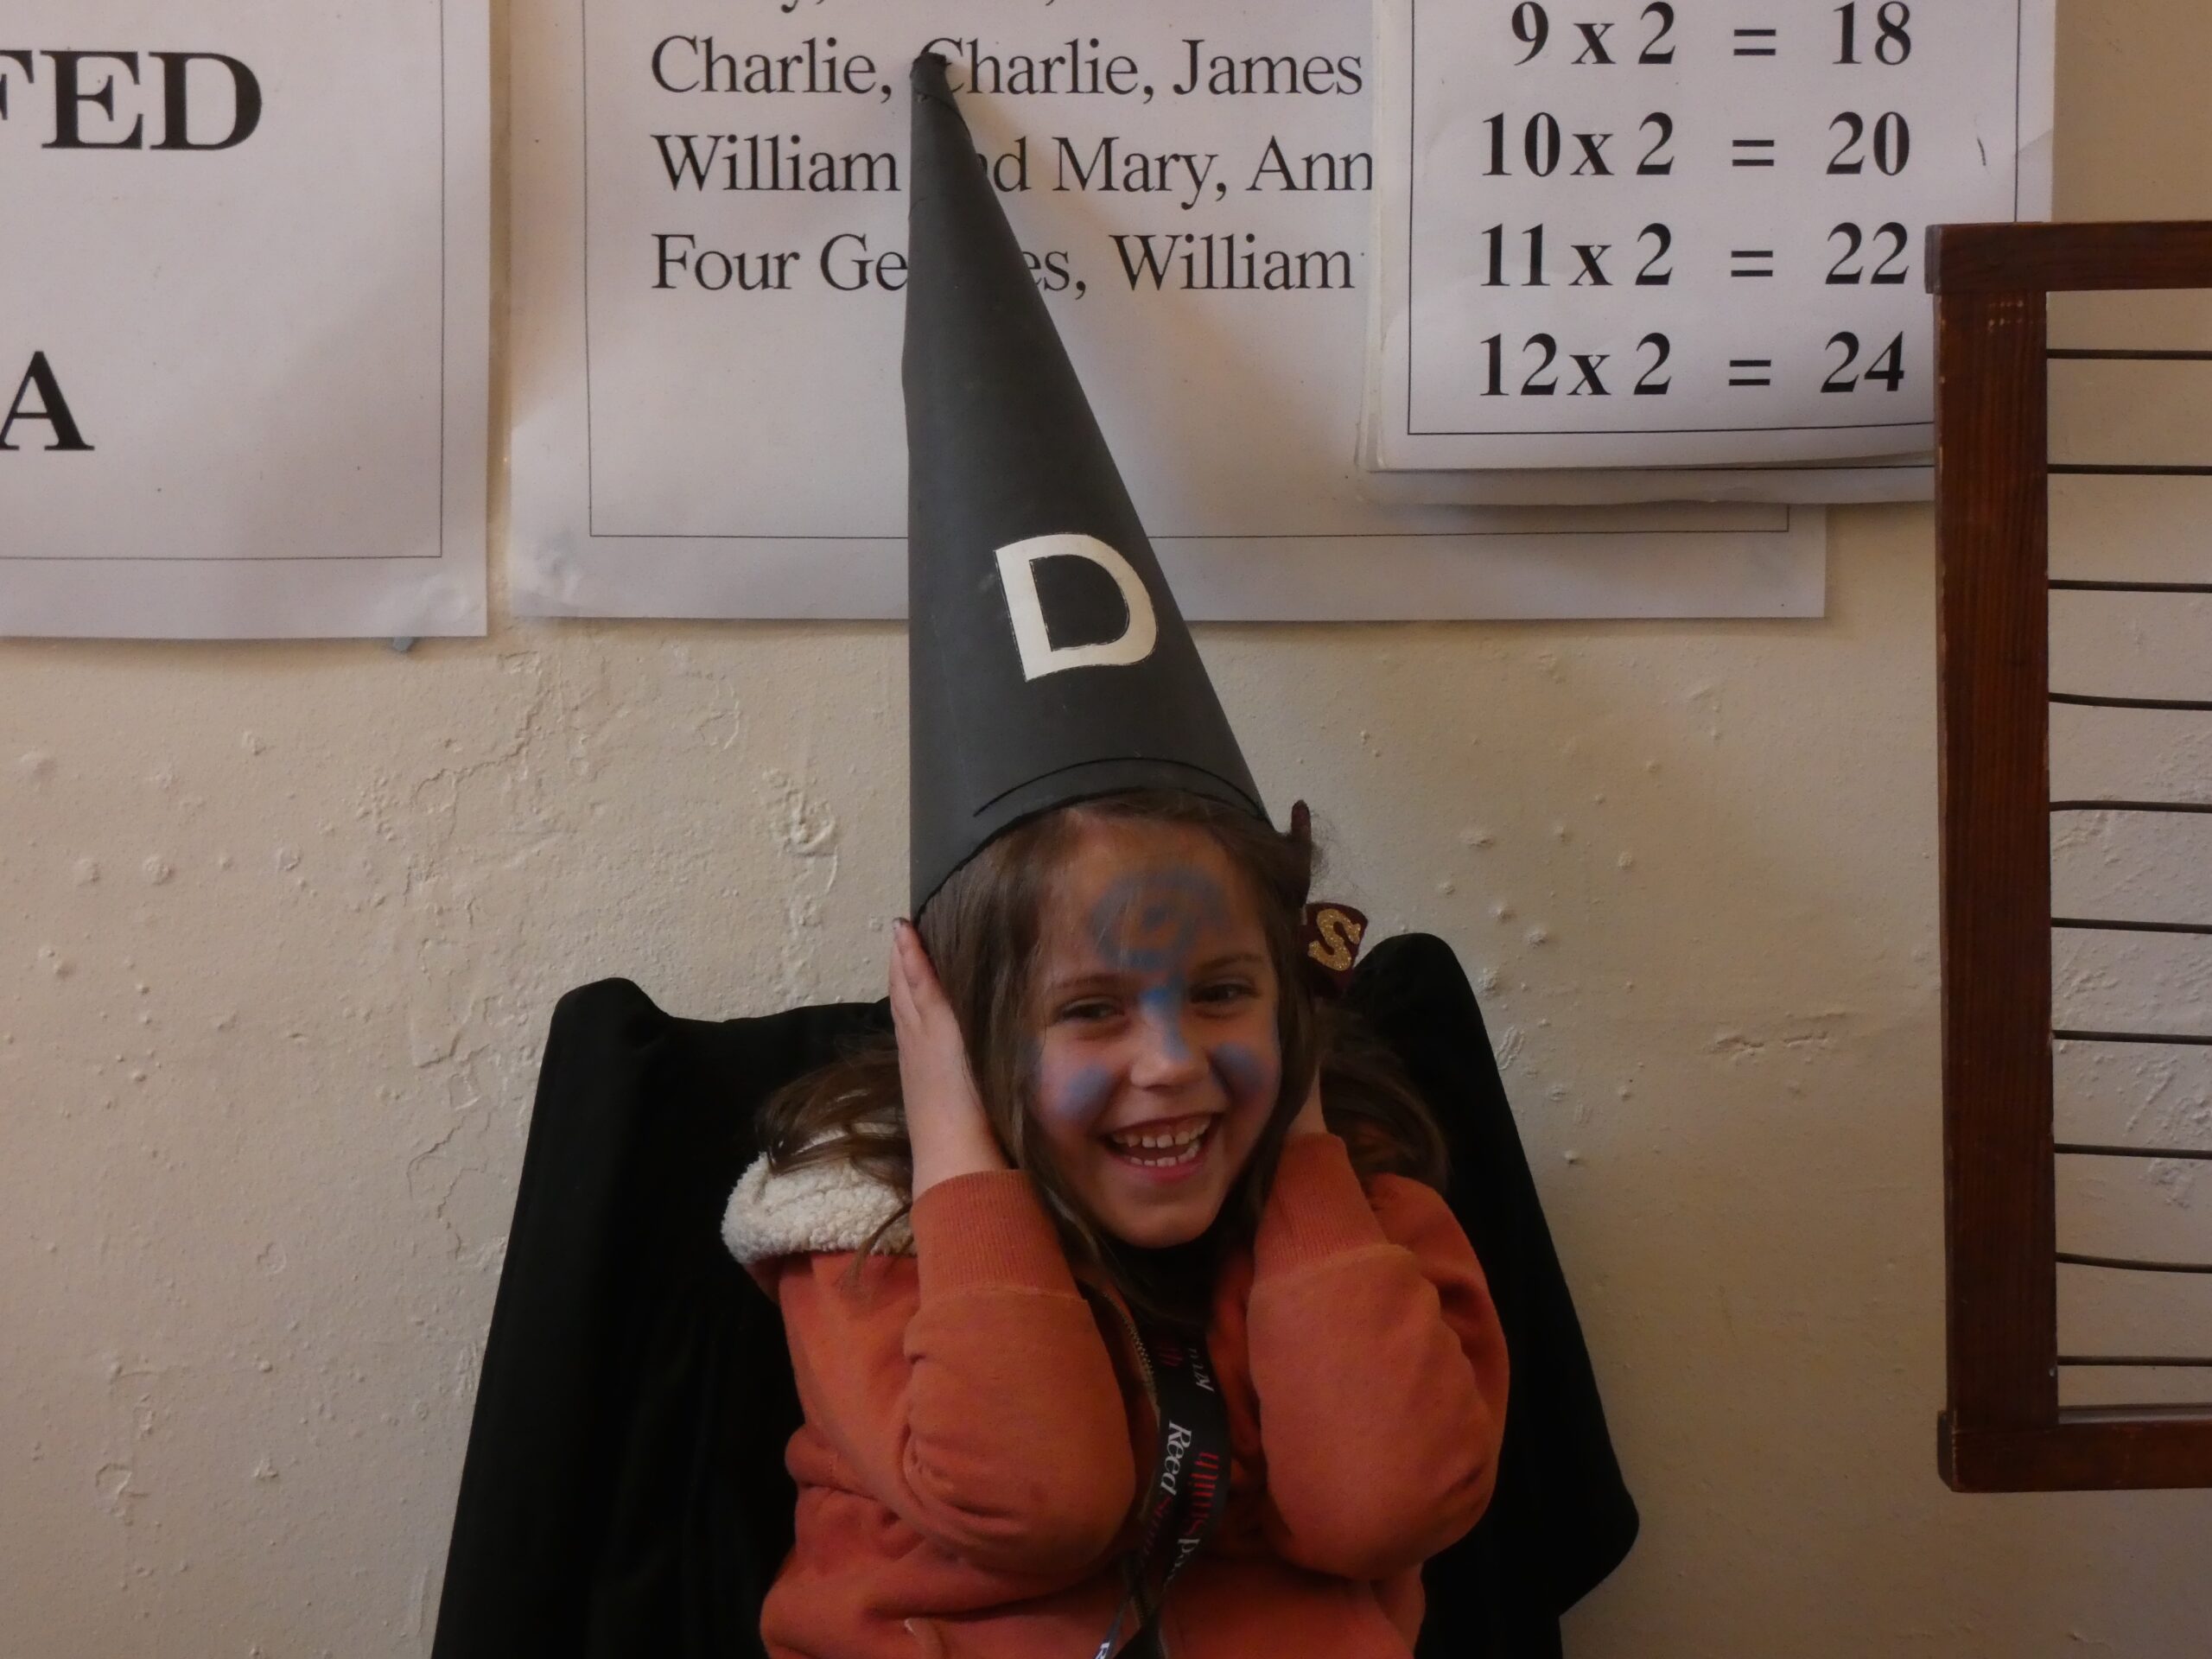 Girl trying out Dunce cap at the PPUK Be Curious Weekend 2019